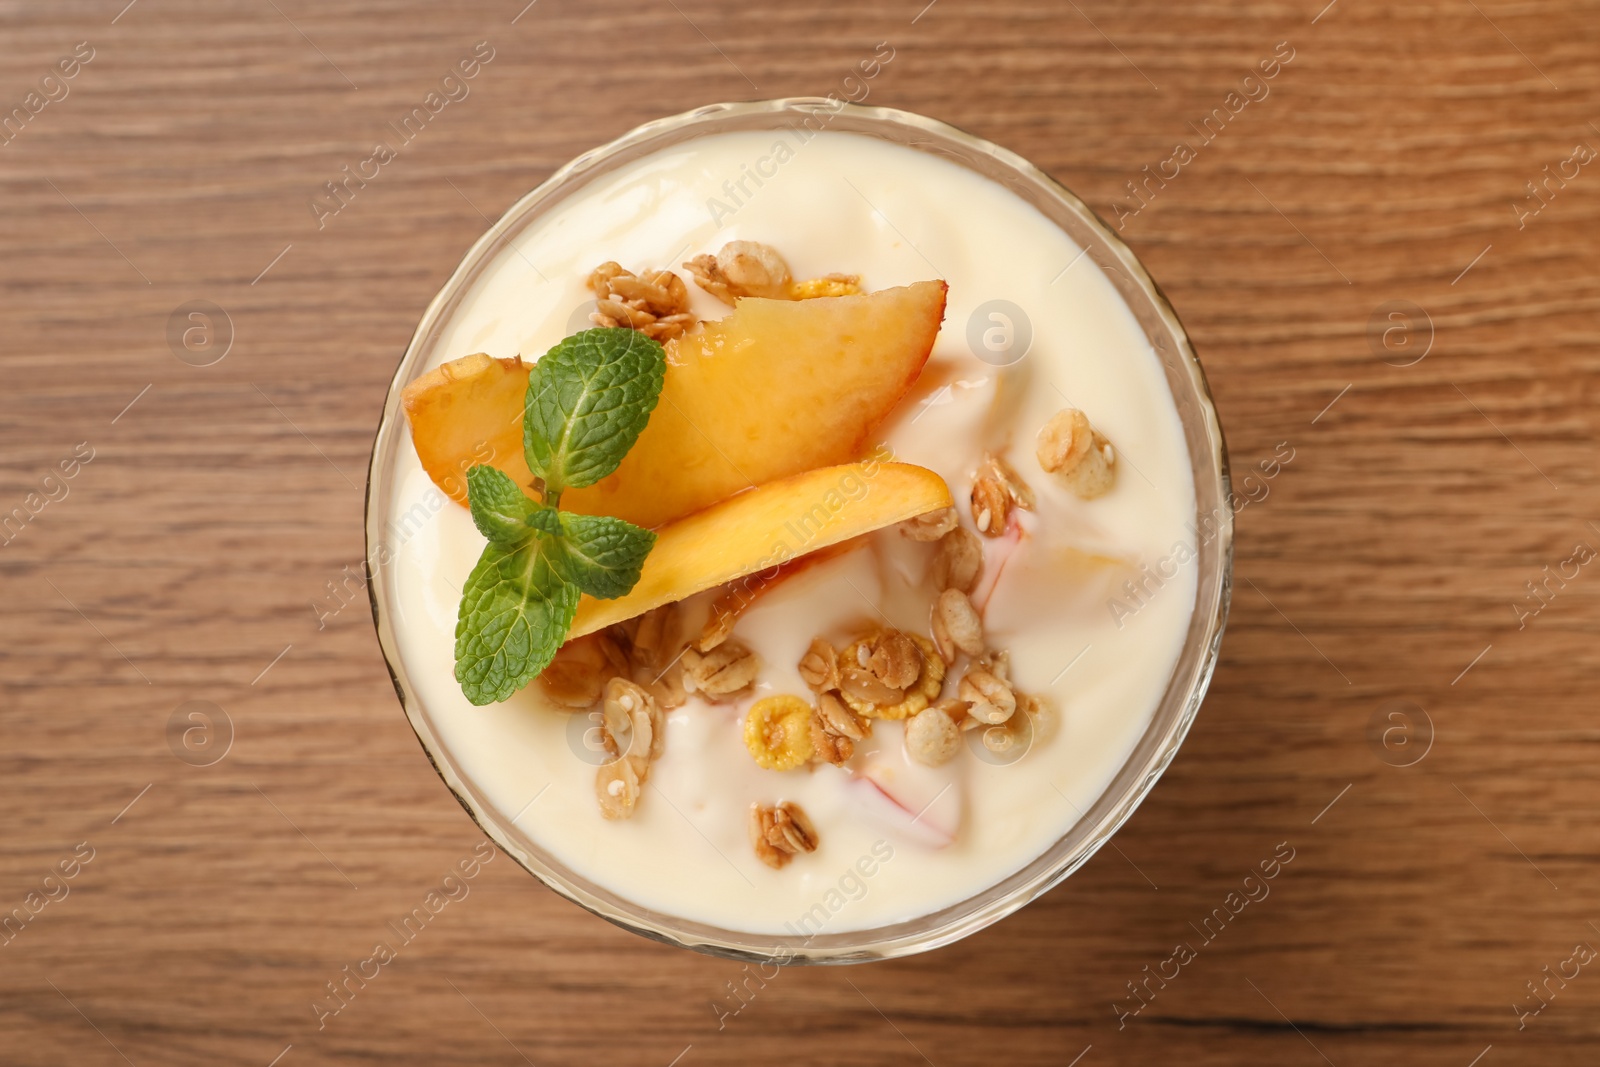 Photo of Tasty peach yogurt with granola, mint and pieces of fruit in dessert bowl on wooden table, top view